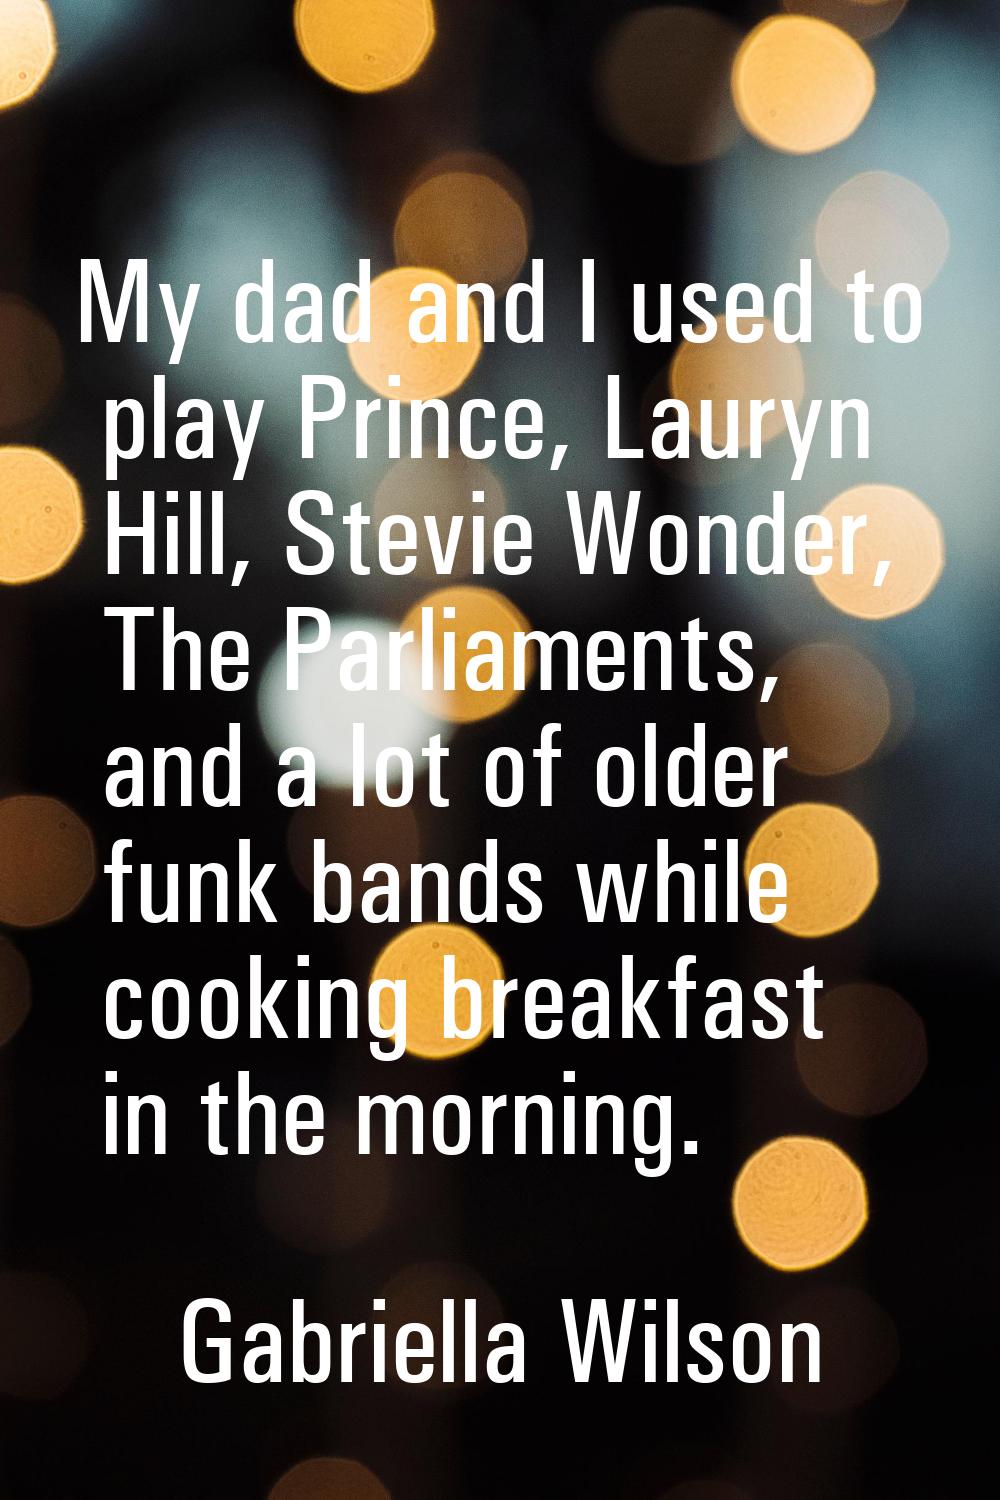 My dad and I used to play Prince, Lauryn Hill, Stevie Wonder, The Parliaments, and a lot of older f